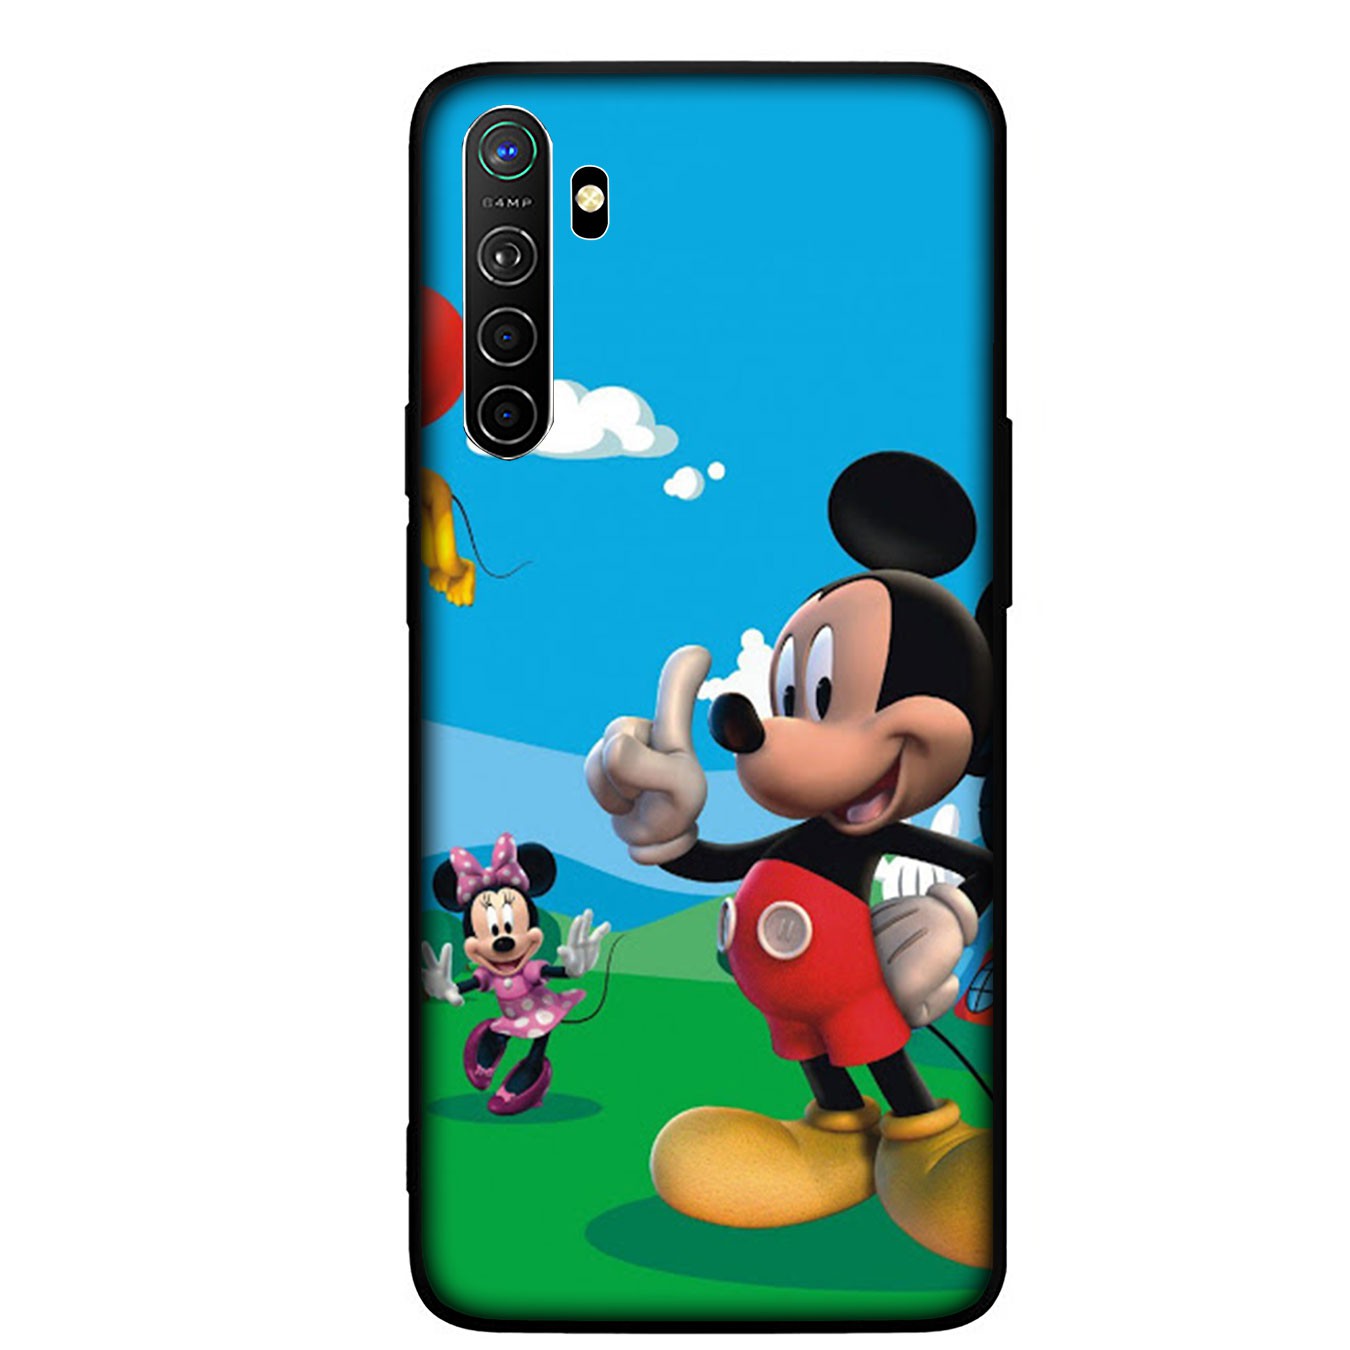 Samsung Galaxy A02S J2 J4 J5 J6 Plus J7 Prime A02 M02 j6+ A42 + Casing Soft Silicone cute Mickey Mouse Cartoon Phone Case